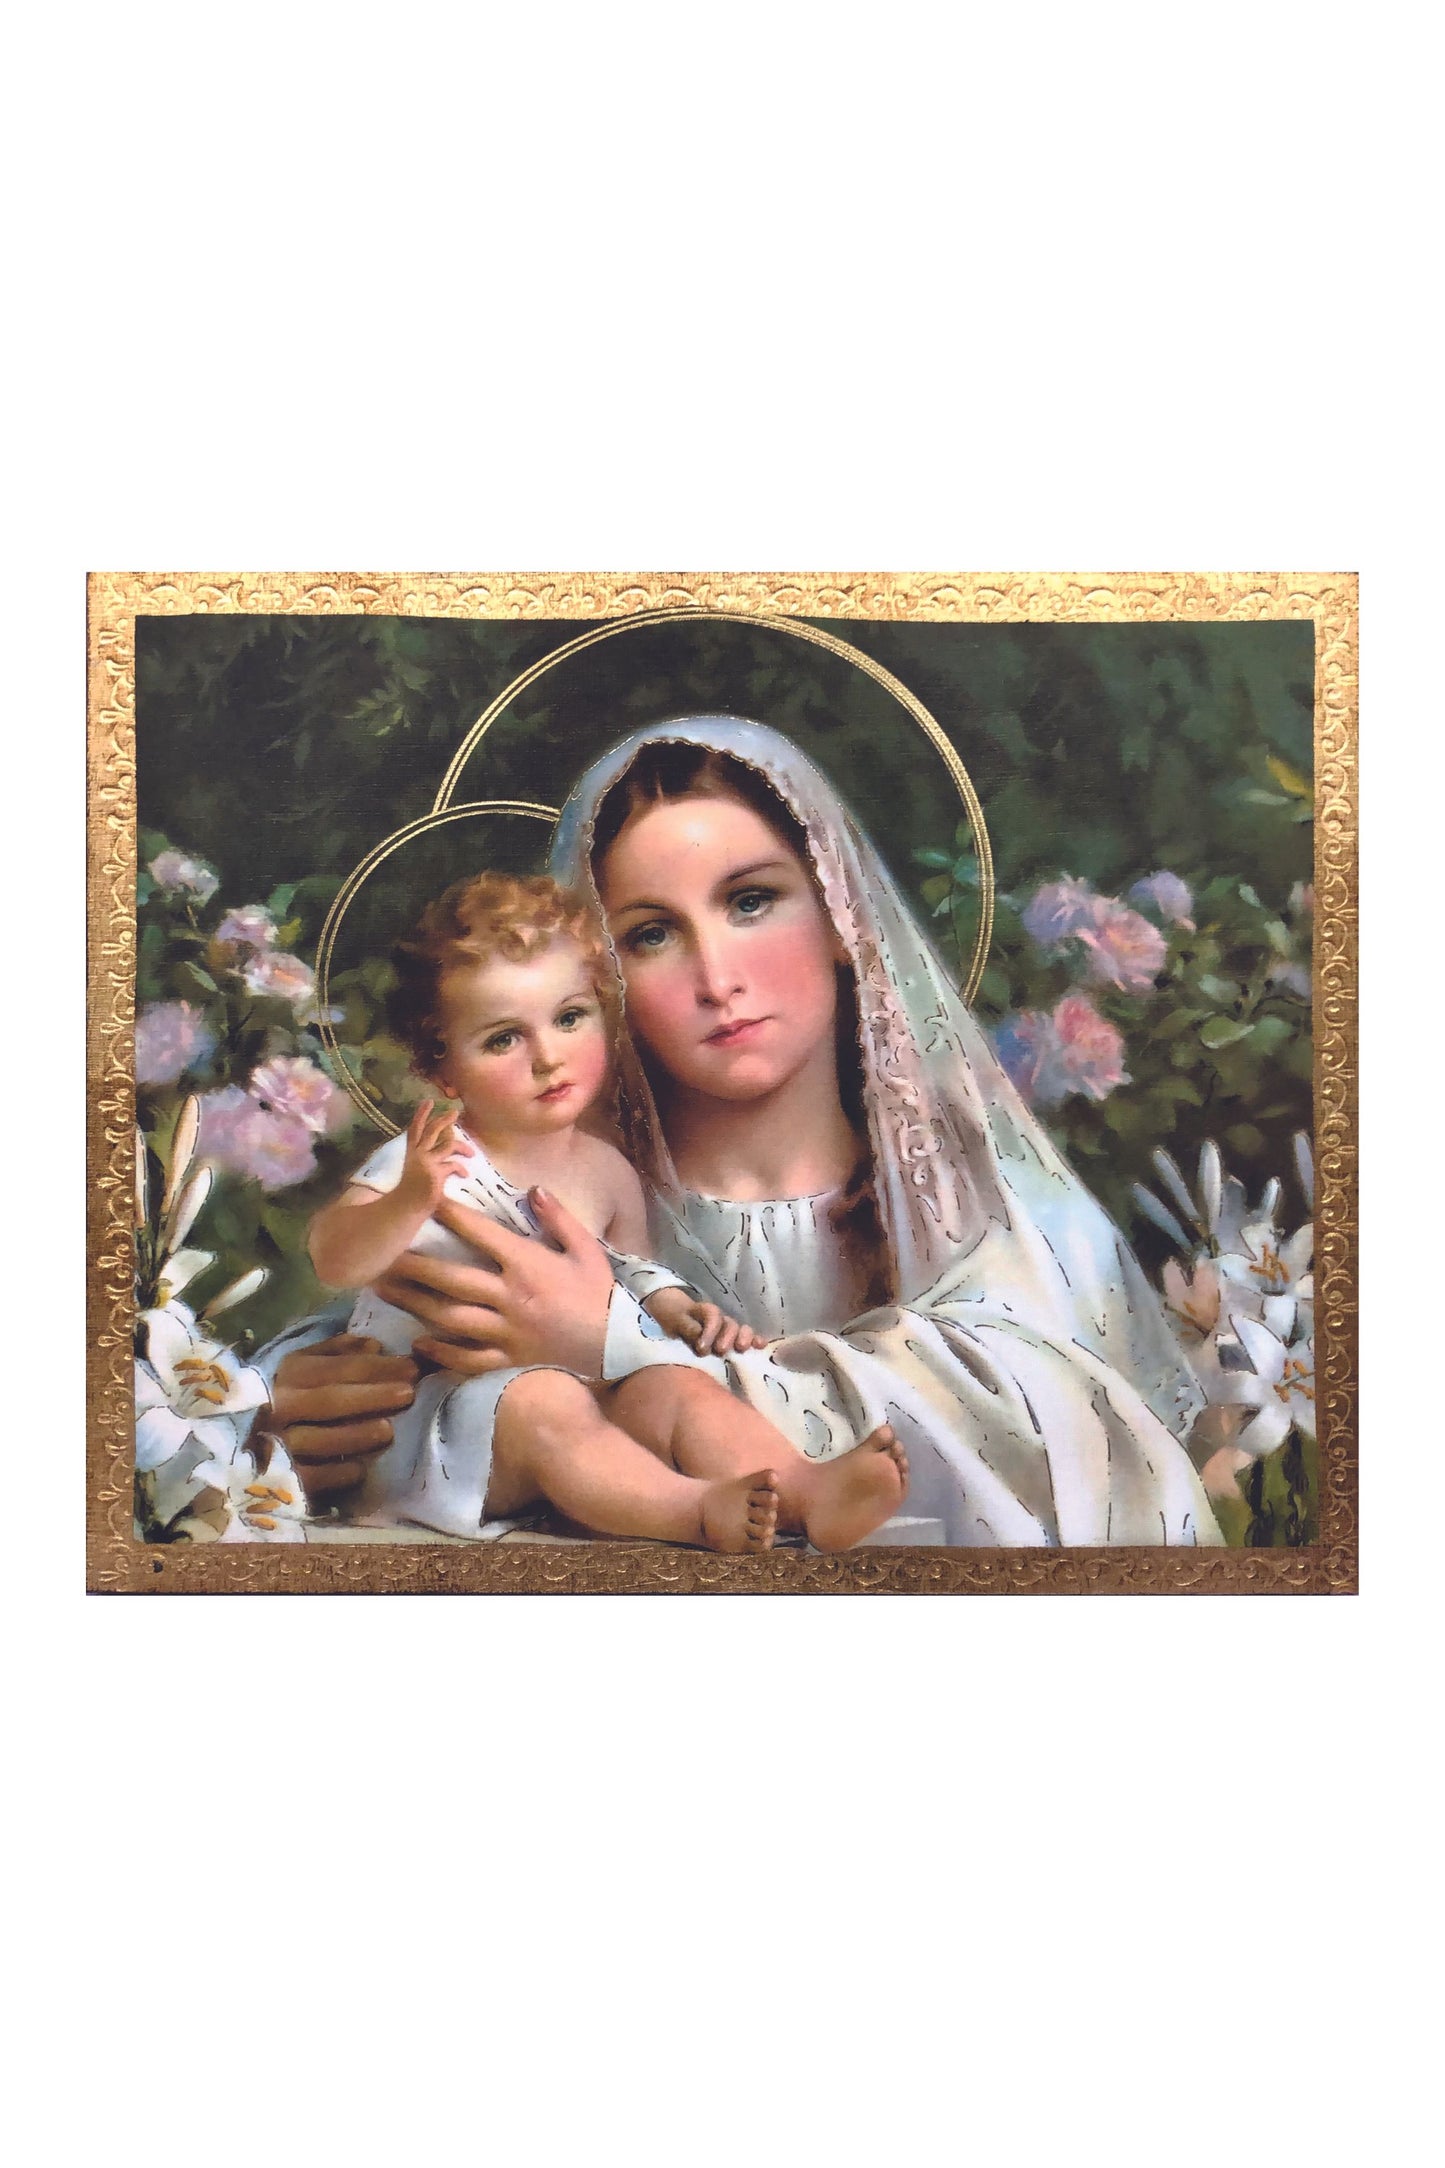 L-148-285 Madonna & Child with Lilies Florentine Plaque by Simeone 8x10"